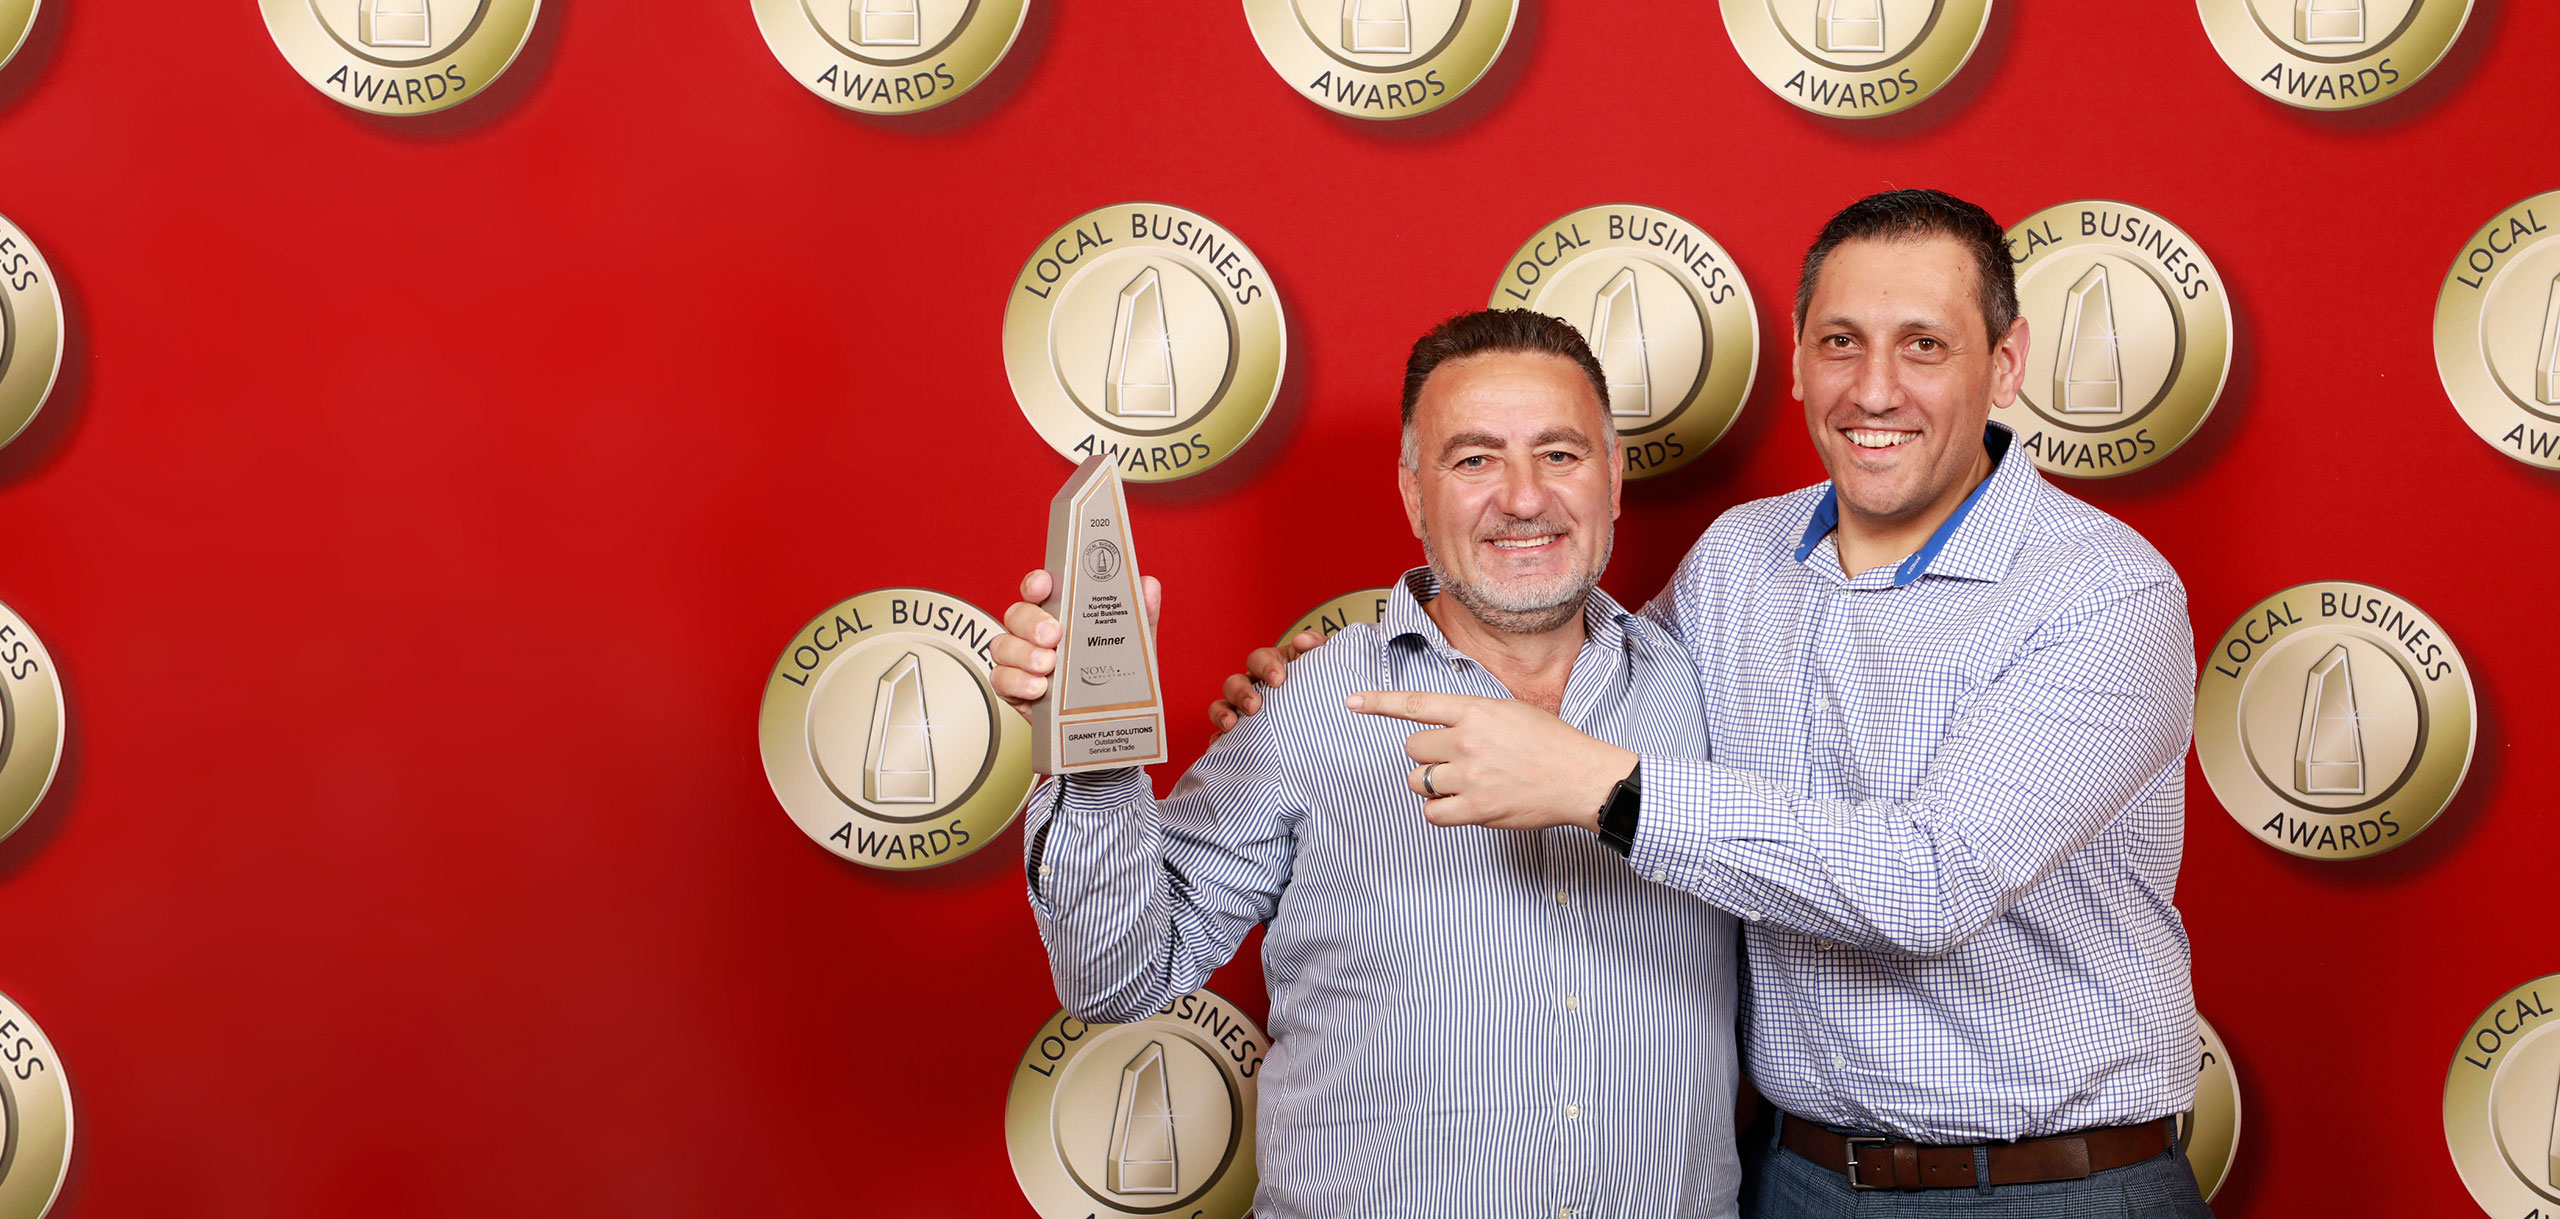 Two men holding local business award